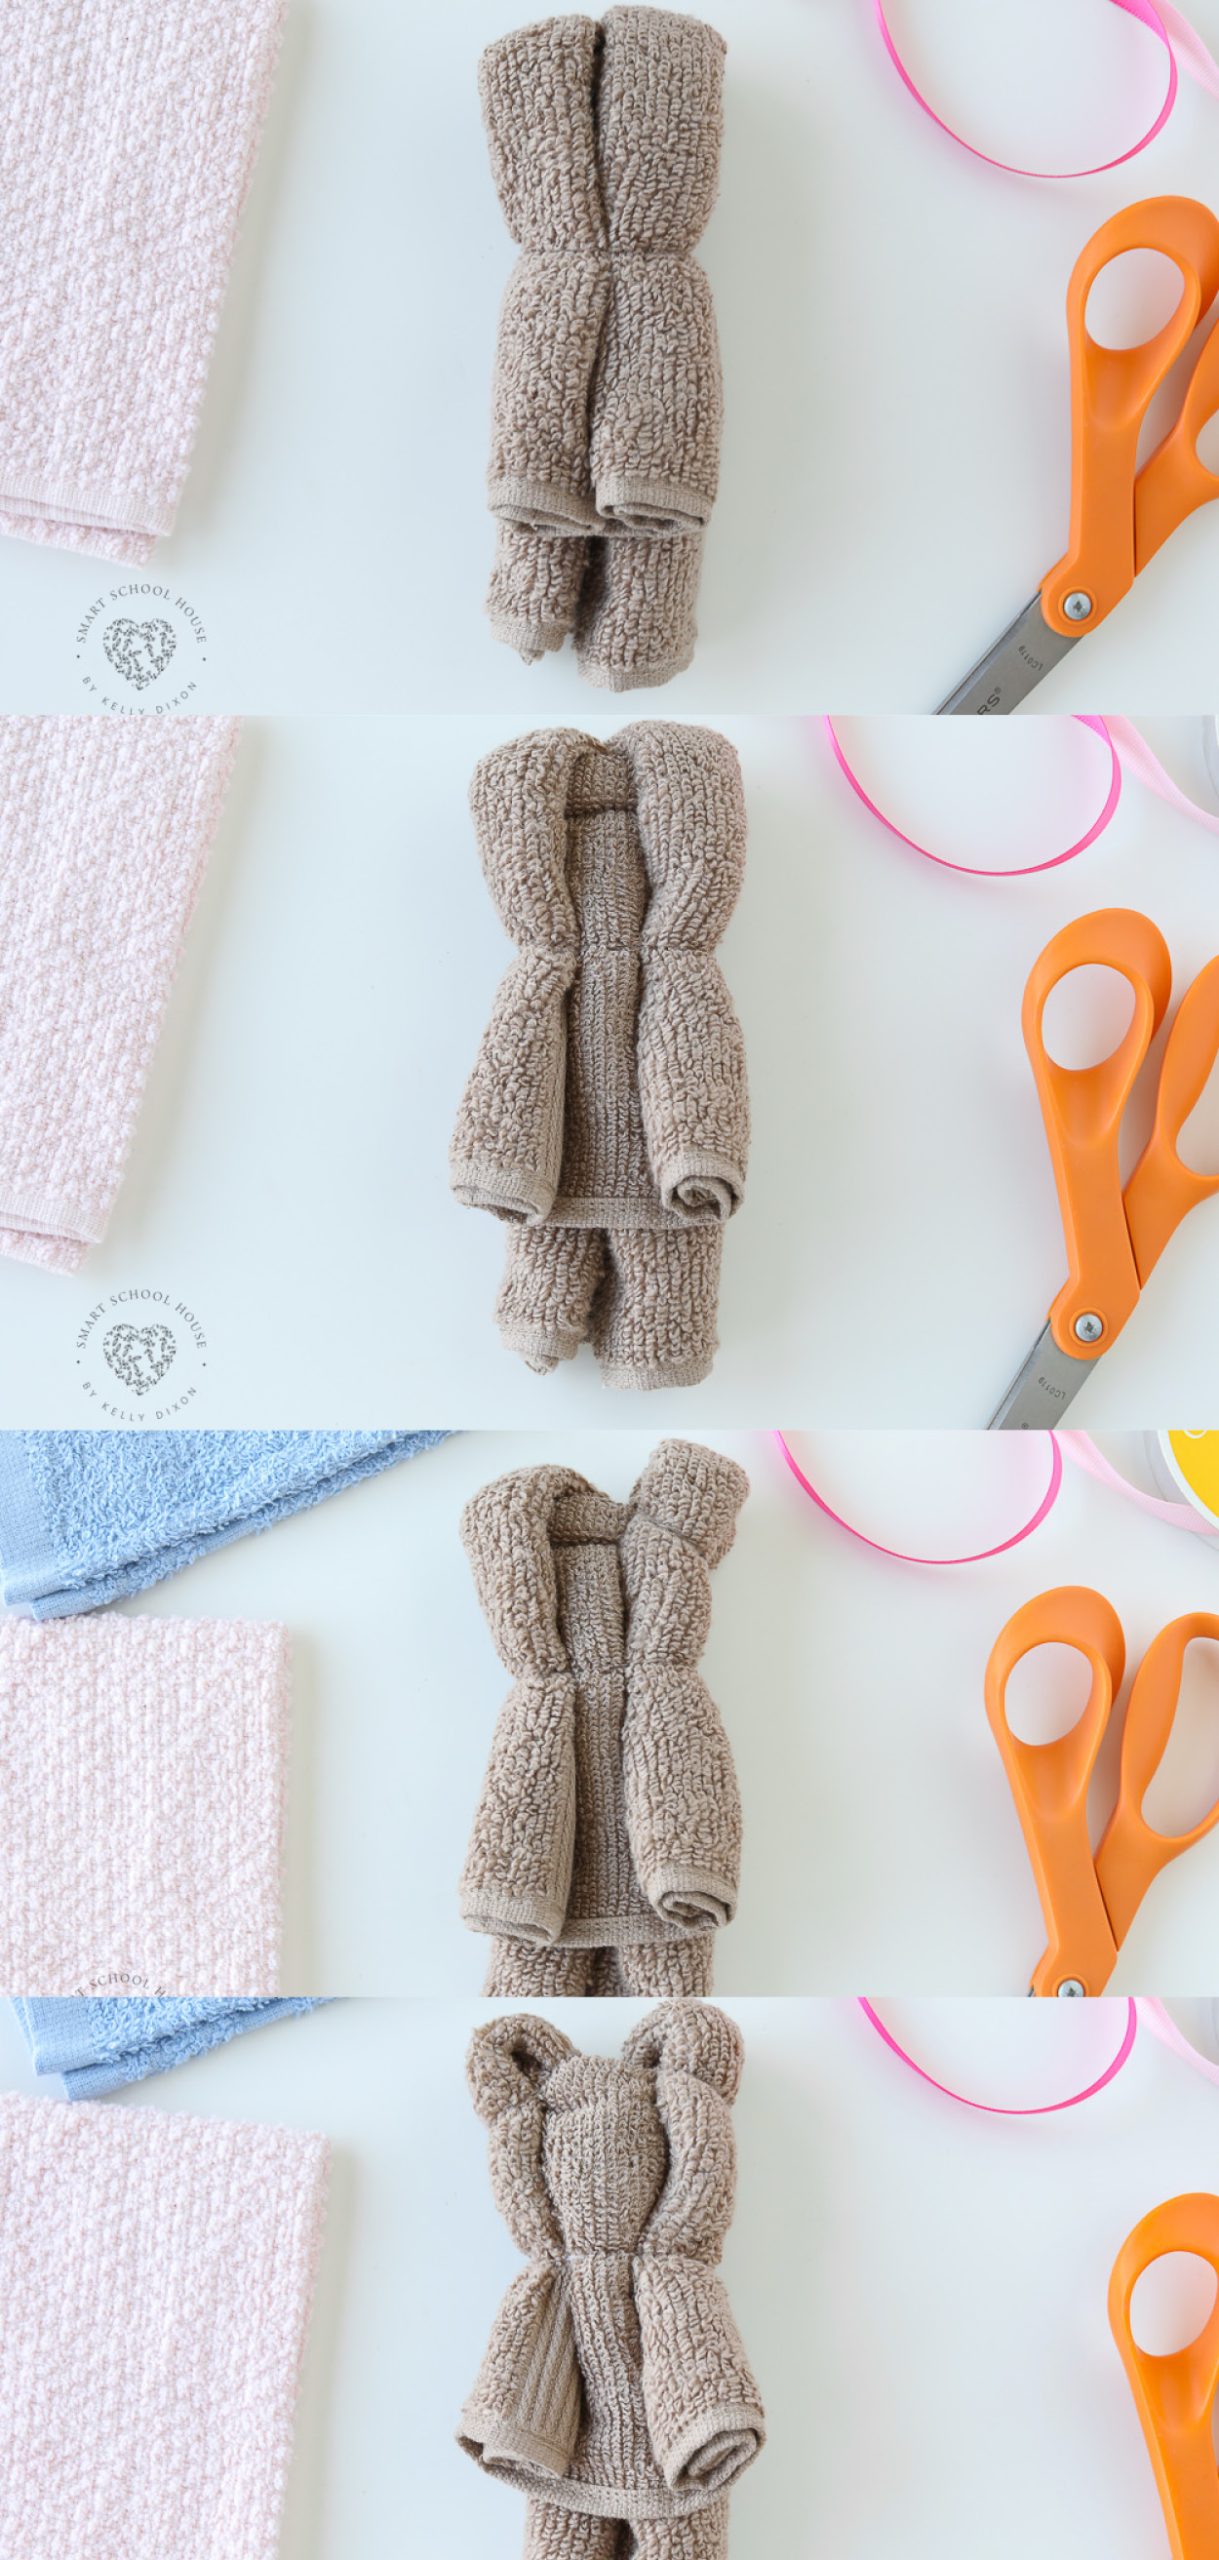 How to make a bear with a towel